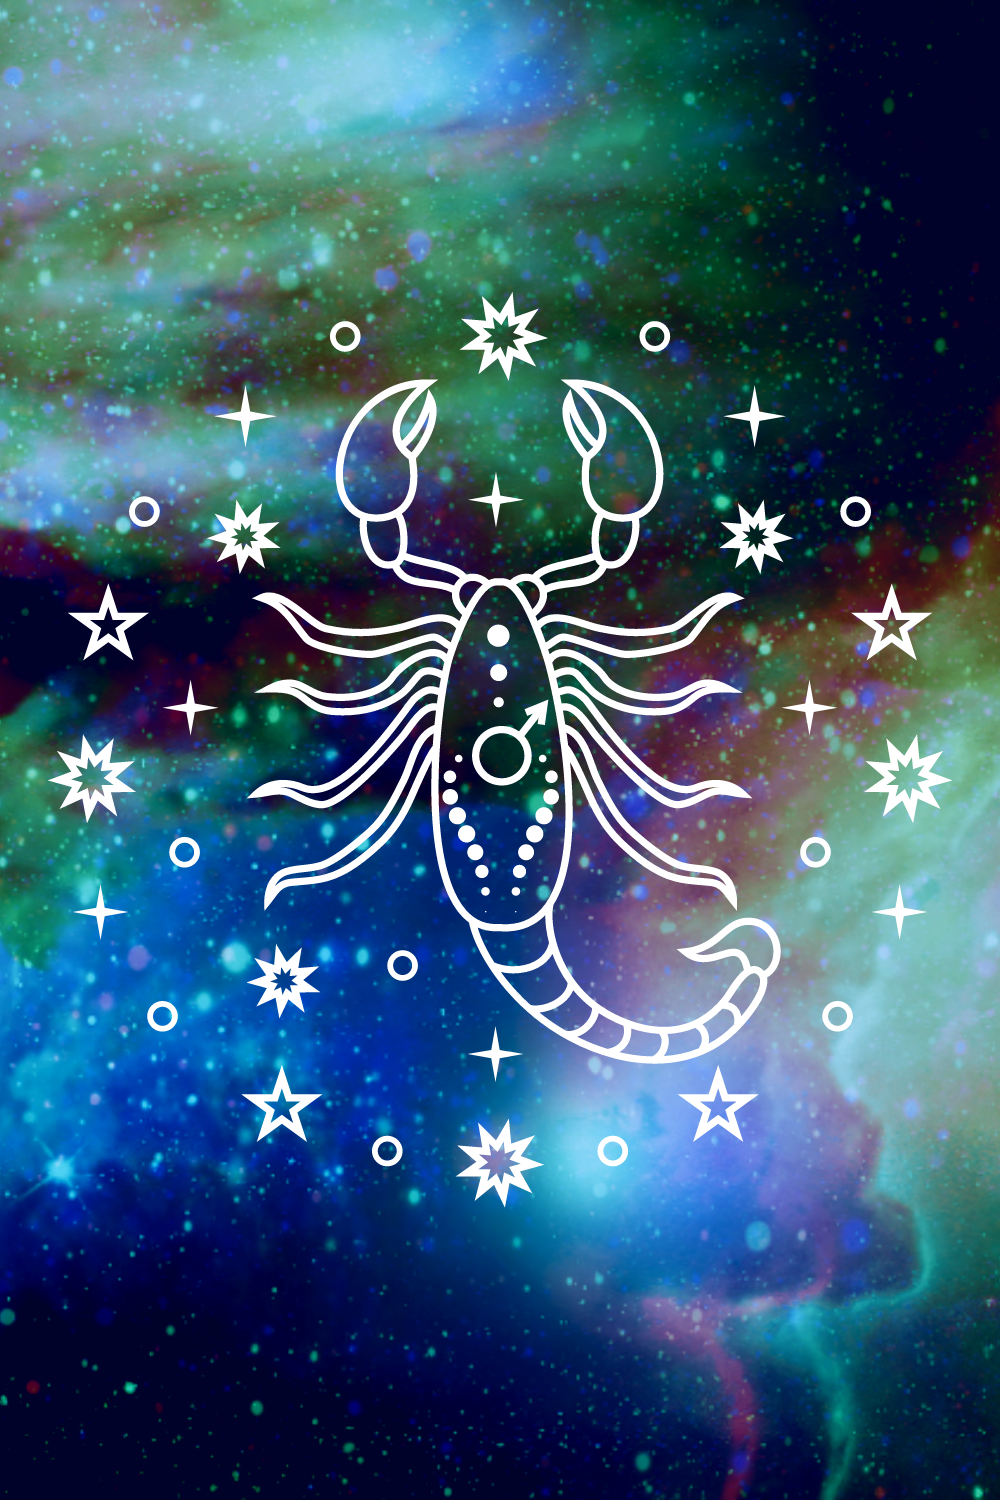 Watercolor space background. Illustration of a scorpion with the sign of mars and stars.